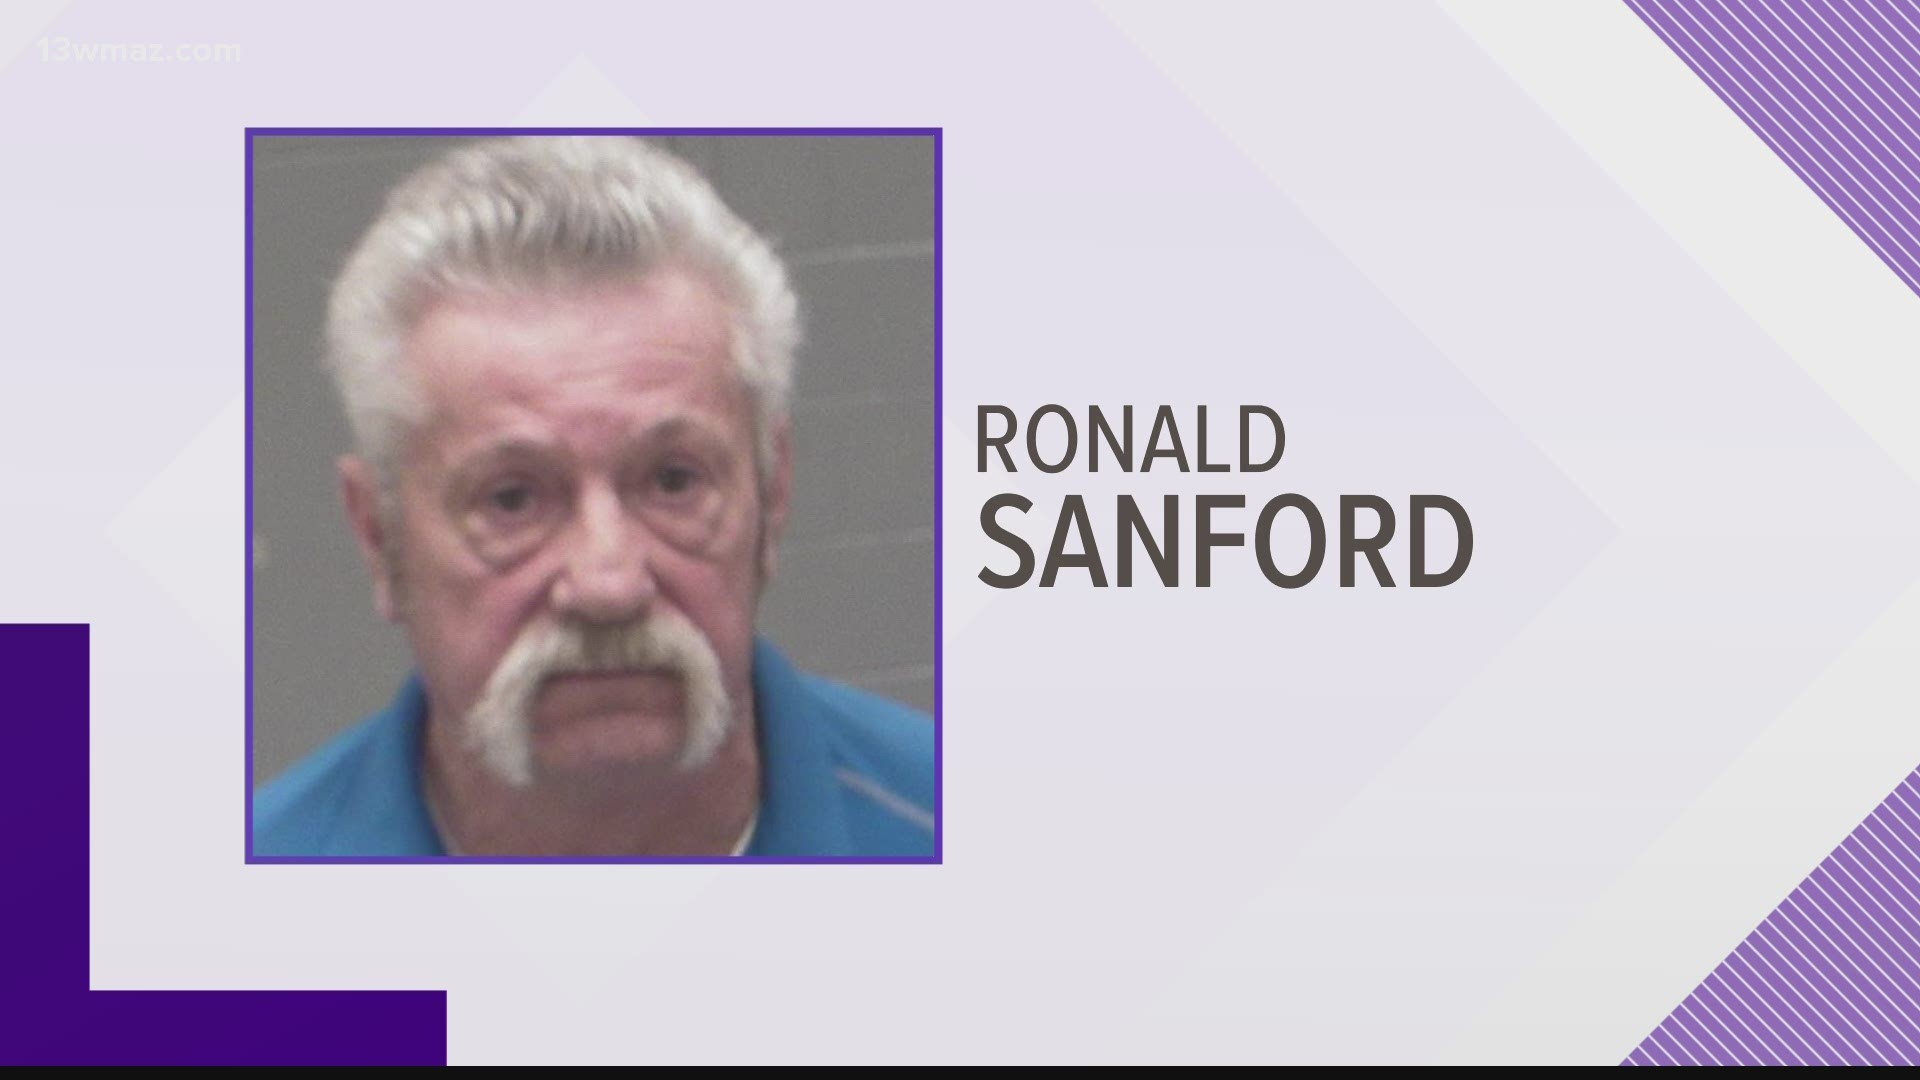 A 71-year-old Peach County man is charged with distributing child porn Monday after the GBI executed a search warrant at his home last week.